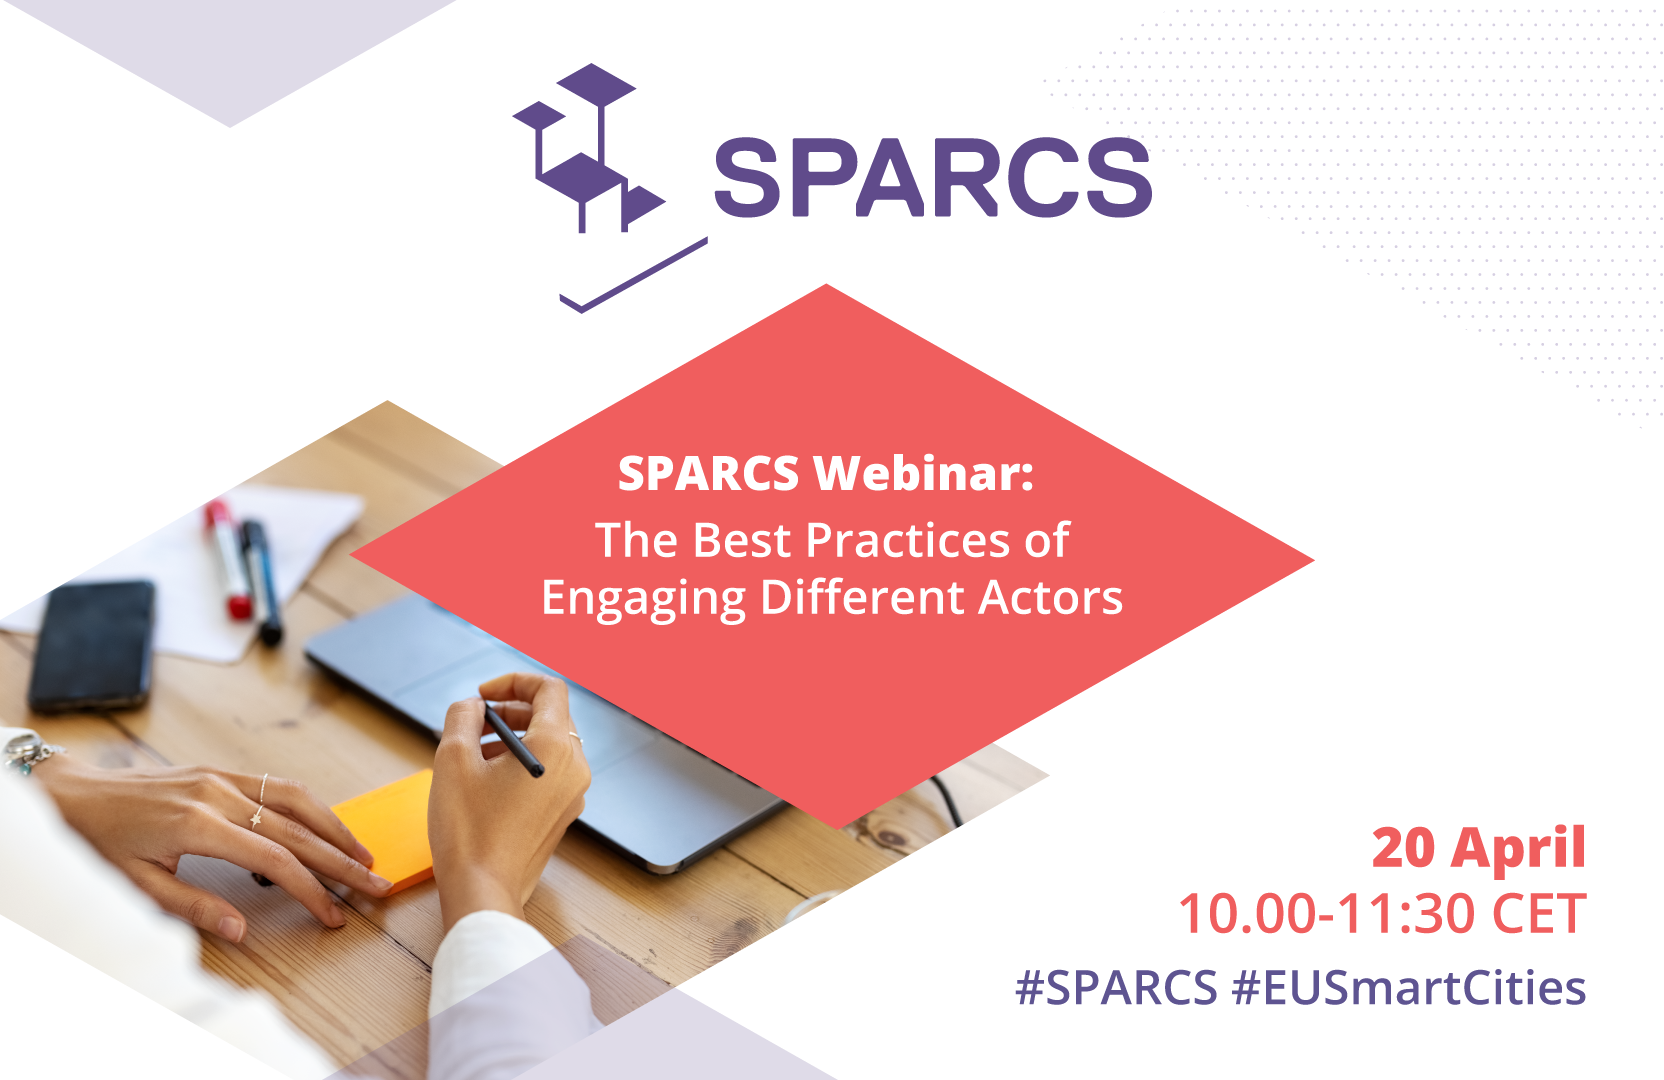 Key Learnings: Webinar on best practices to engage different actors